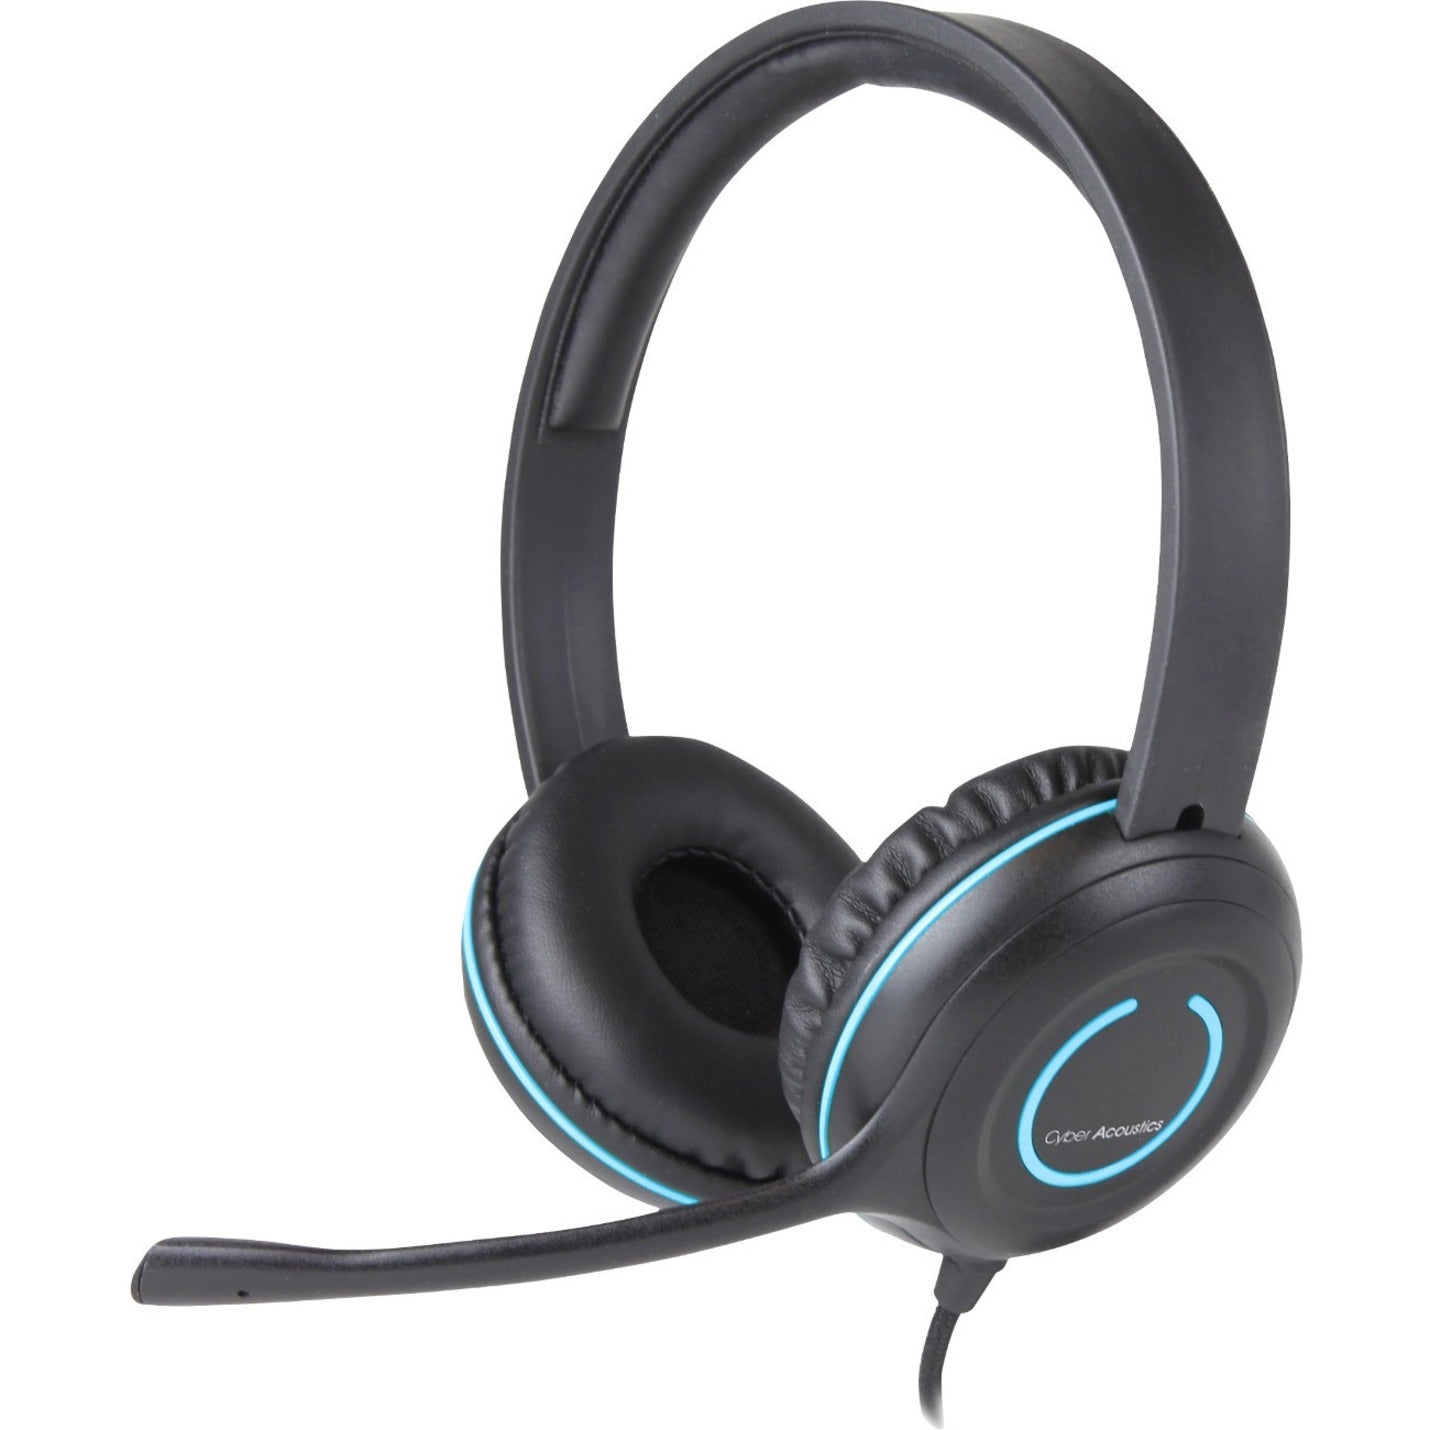 Cyber Acoustics AC5002 Stereo Headset w/ Single Plug - Over-the-head, Noise Cancelling, Uni-directional Microphone